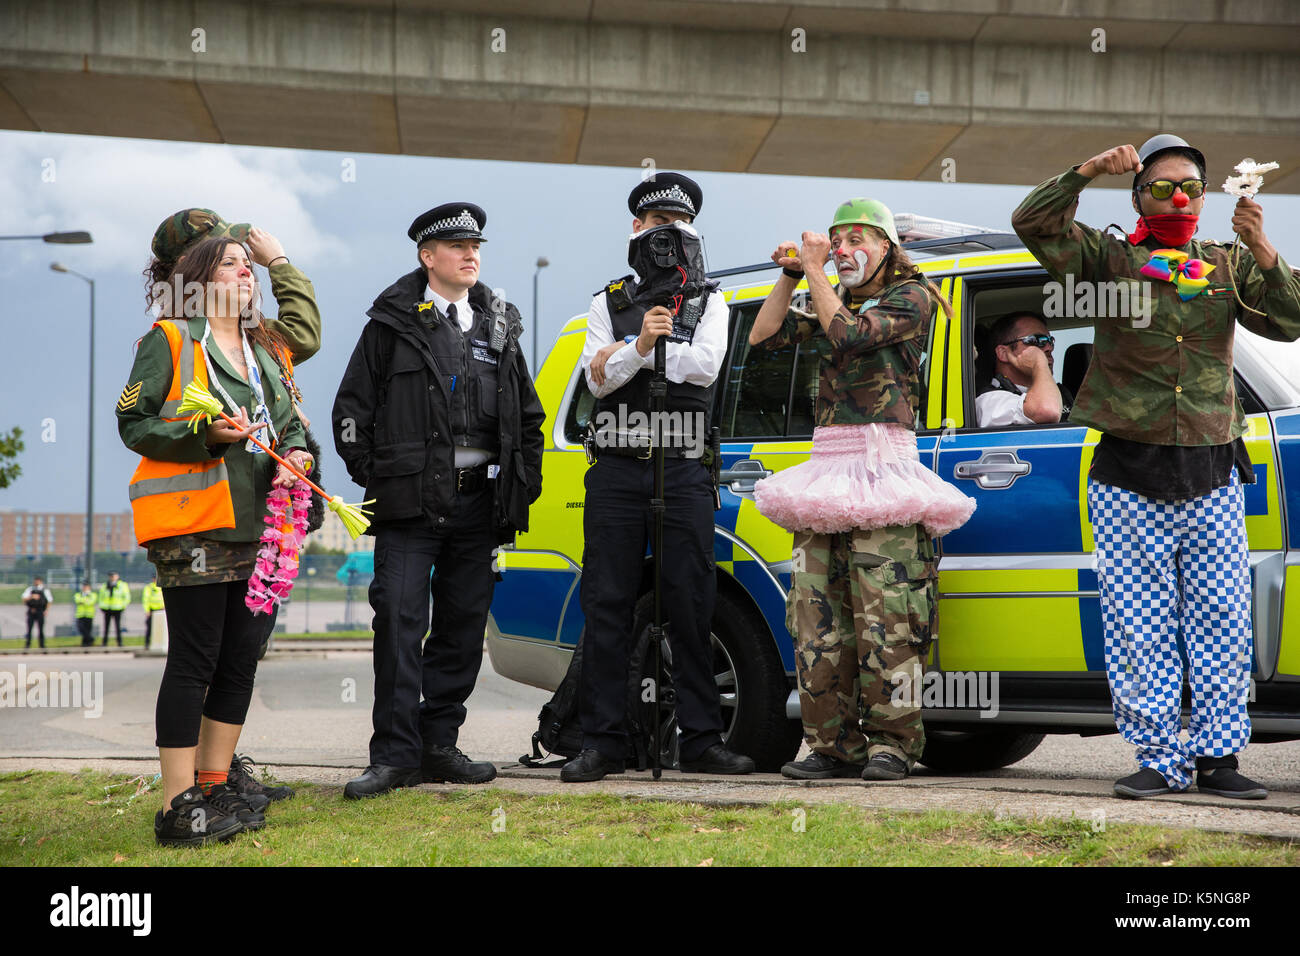 London, UK. 9th September, 2017. The Clandestine Insurgent Rebel Clown Army performs close to a police surveillance camera during a protest by activists from many different campaign and faith groups outside the ExCel Centre against the arms trade and the arms fair to be held at the venue next week. DSEI is the world's largest arms fair and military delegations invited by the British government include states named by the Foreign Office as a 'human rights priority', namely Bahrain, Colombia, Egypt, Pakistan and Saudi Arabia. Credit: Mark Kerrison/Alamy Live News Stock Photo